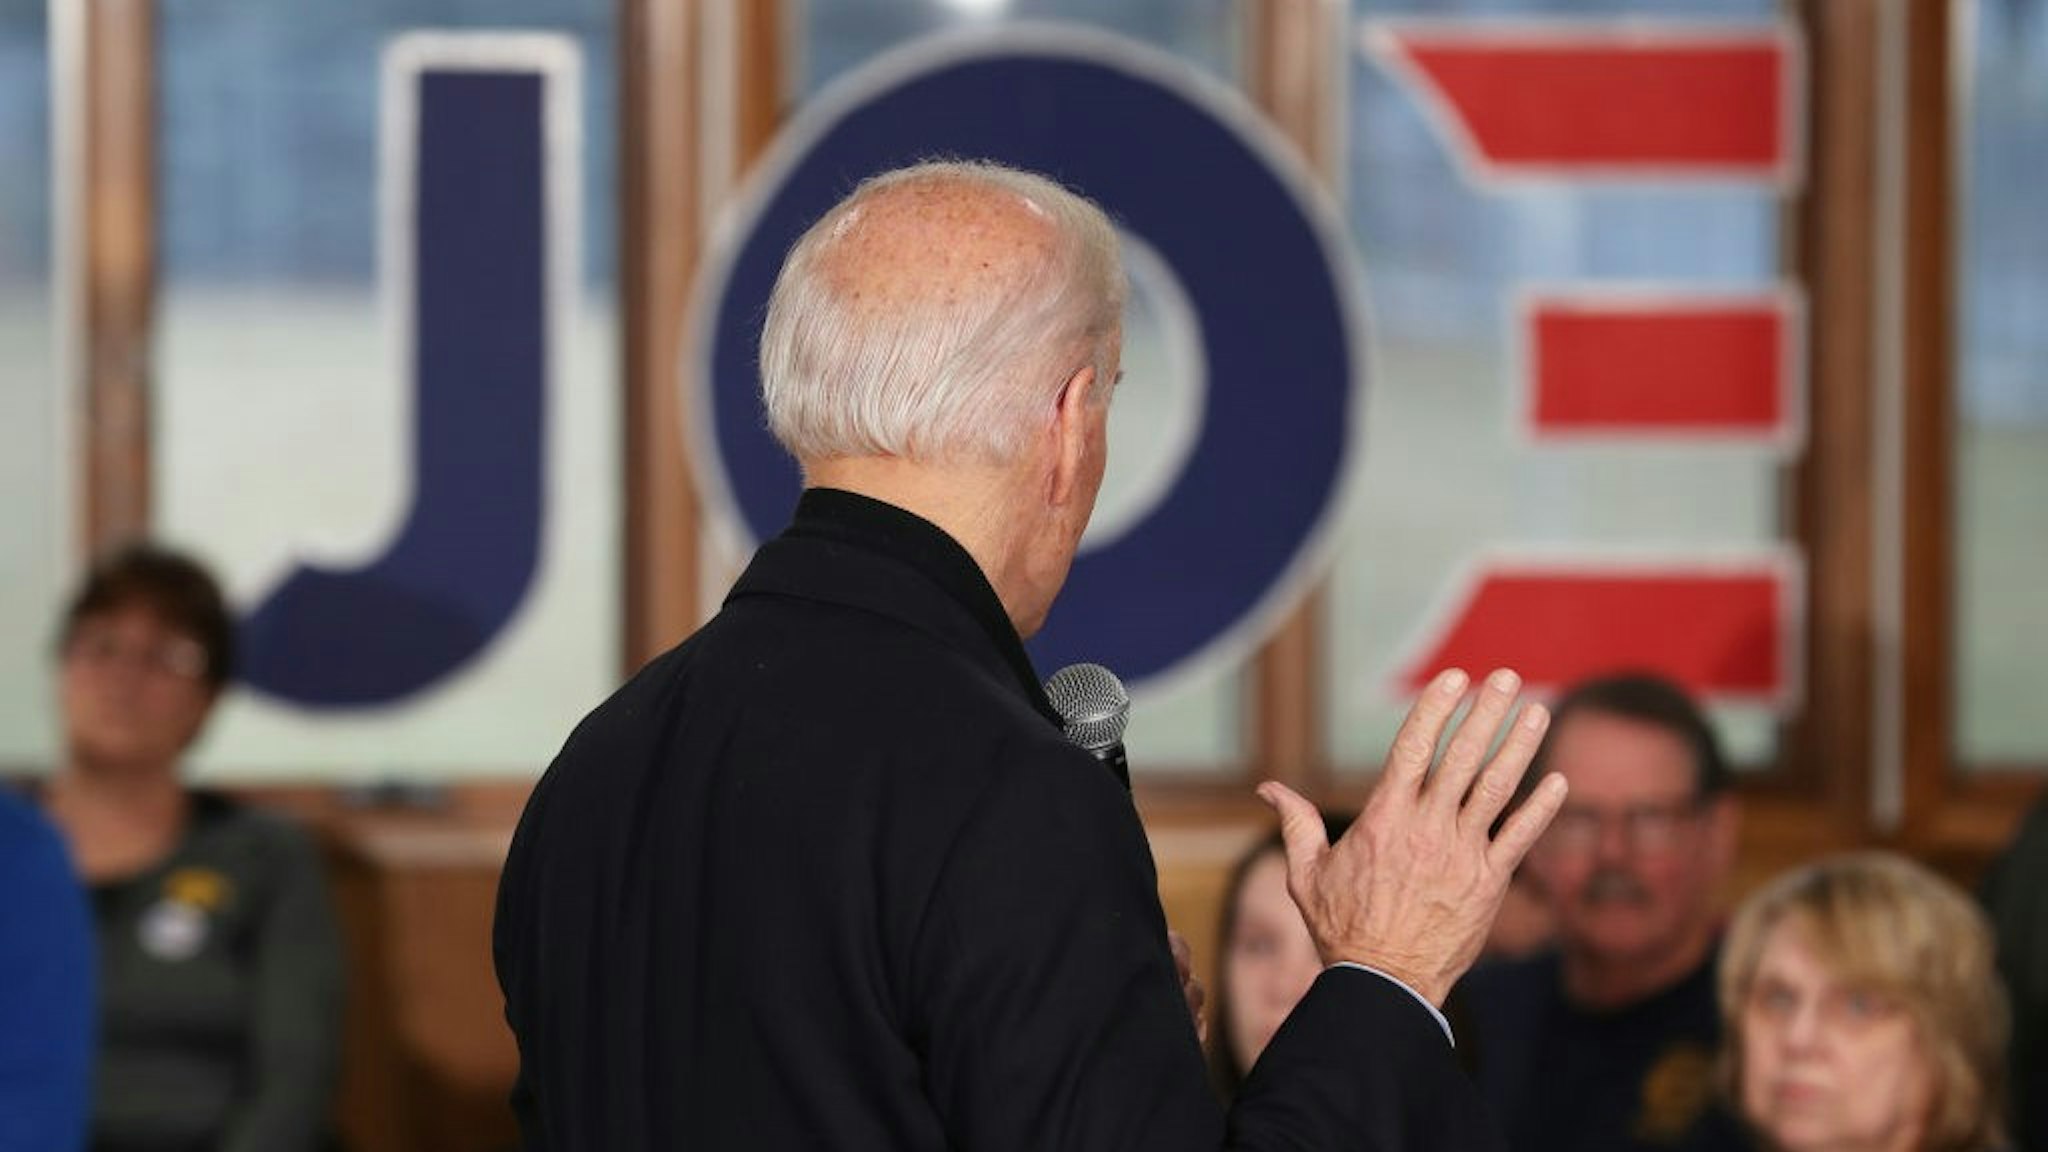 Democratic presidential candidate, former Vice President Joe Biden speaks during a campaign stop at Tipton High School on December 28, 2019 in Tipton, Iowa. The 2020 Iowa Democratic caucuses will take place on February 3, 2020, in the first nominating contest for the Democratic Party in choosing their presidential candidate to face Donald Trump in the 2020 election. (Photo by